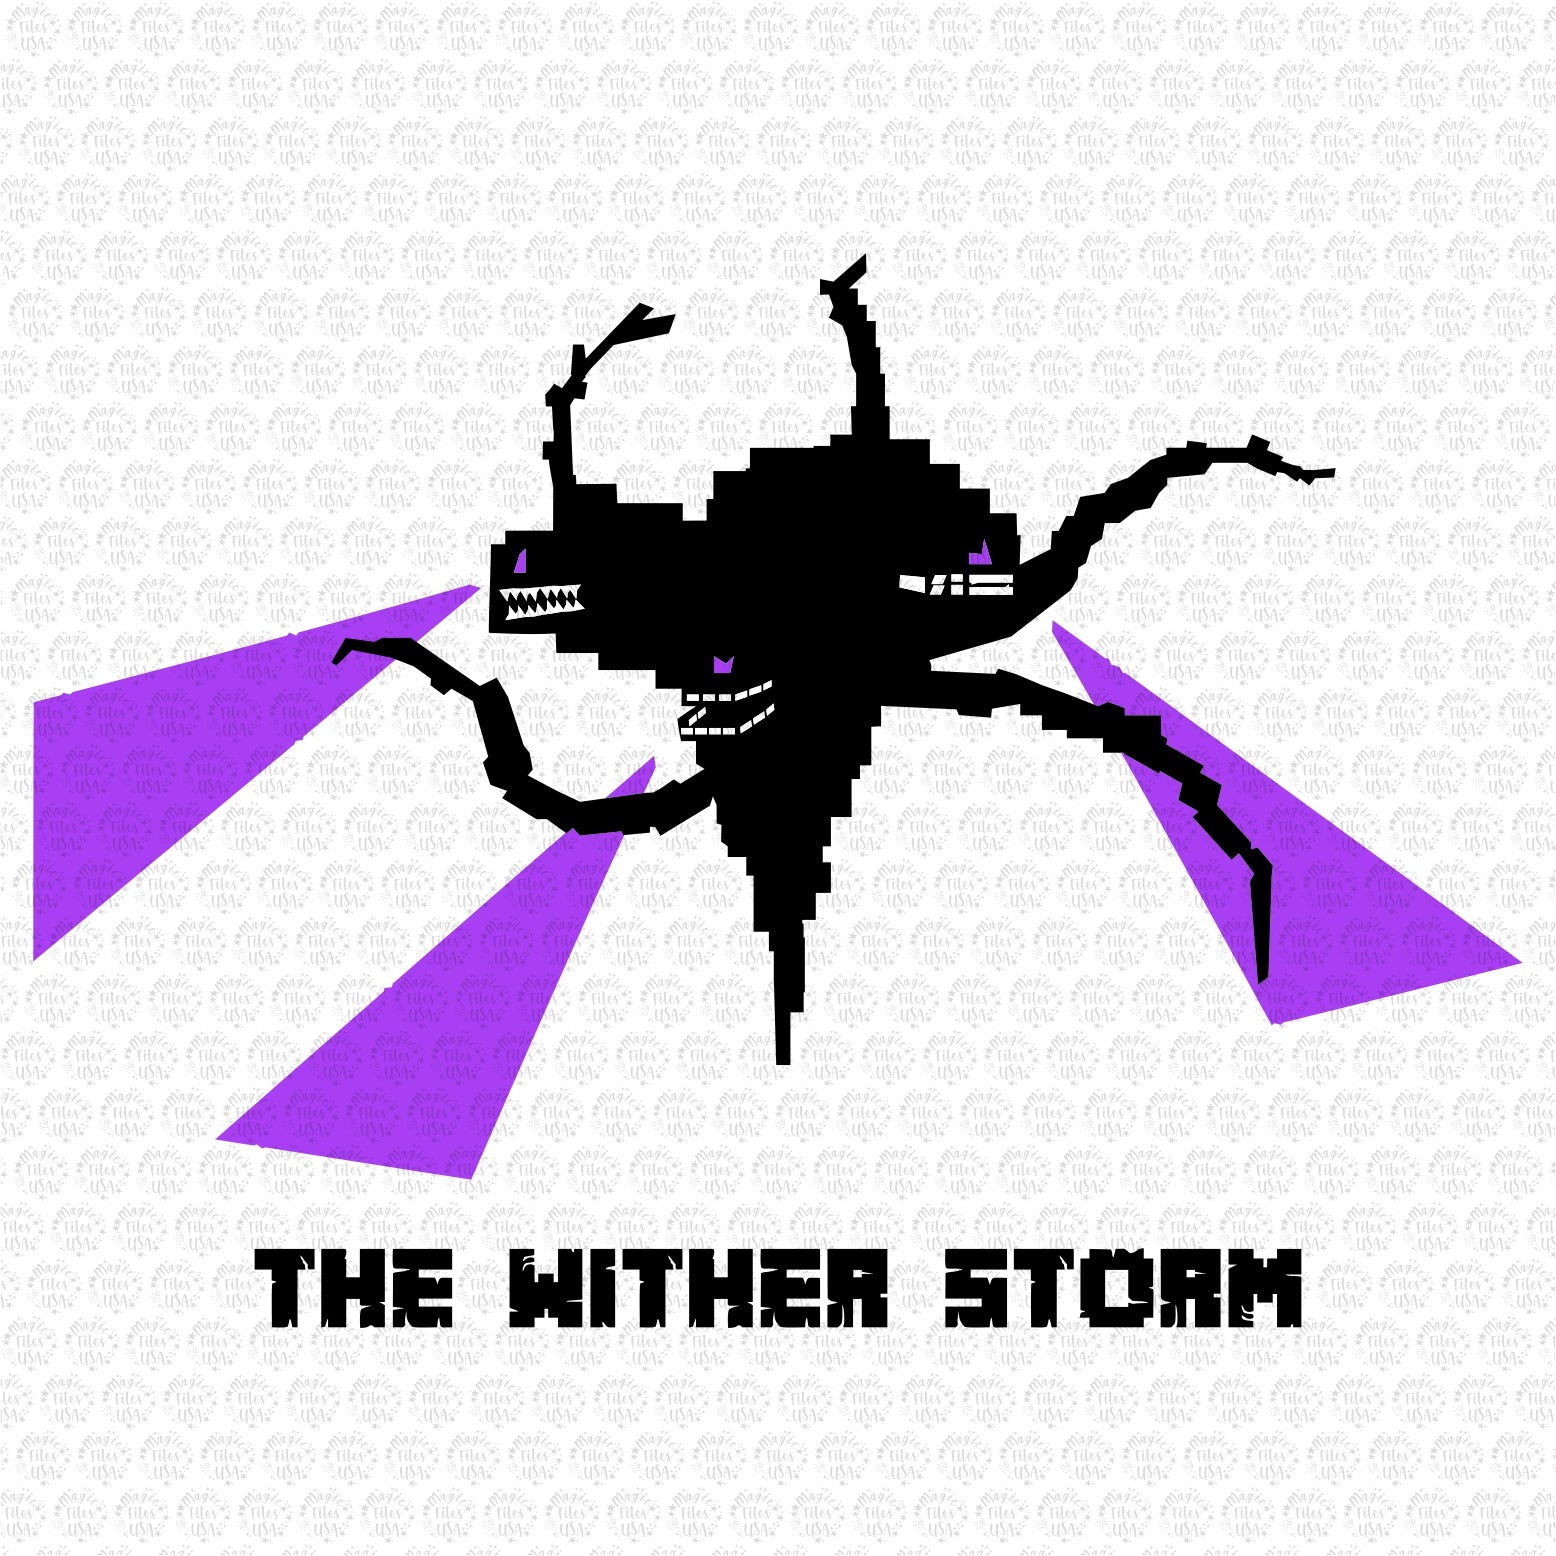 wither storm